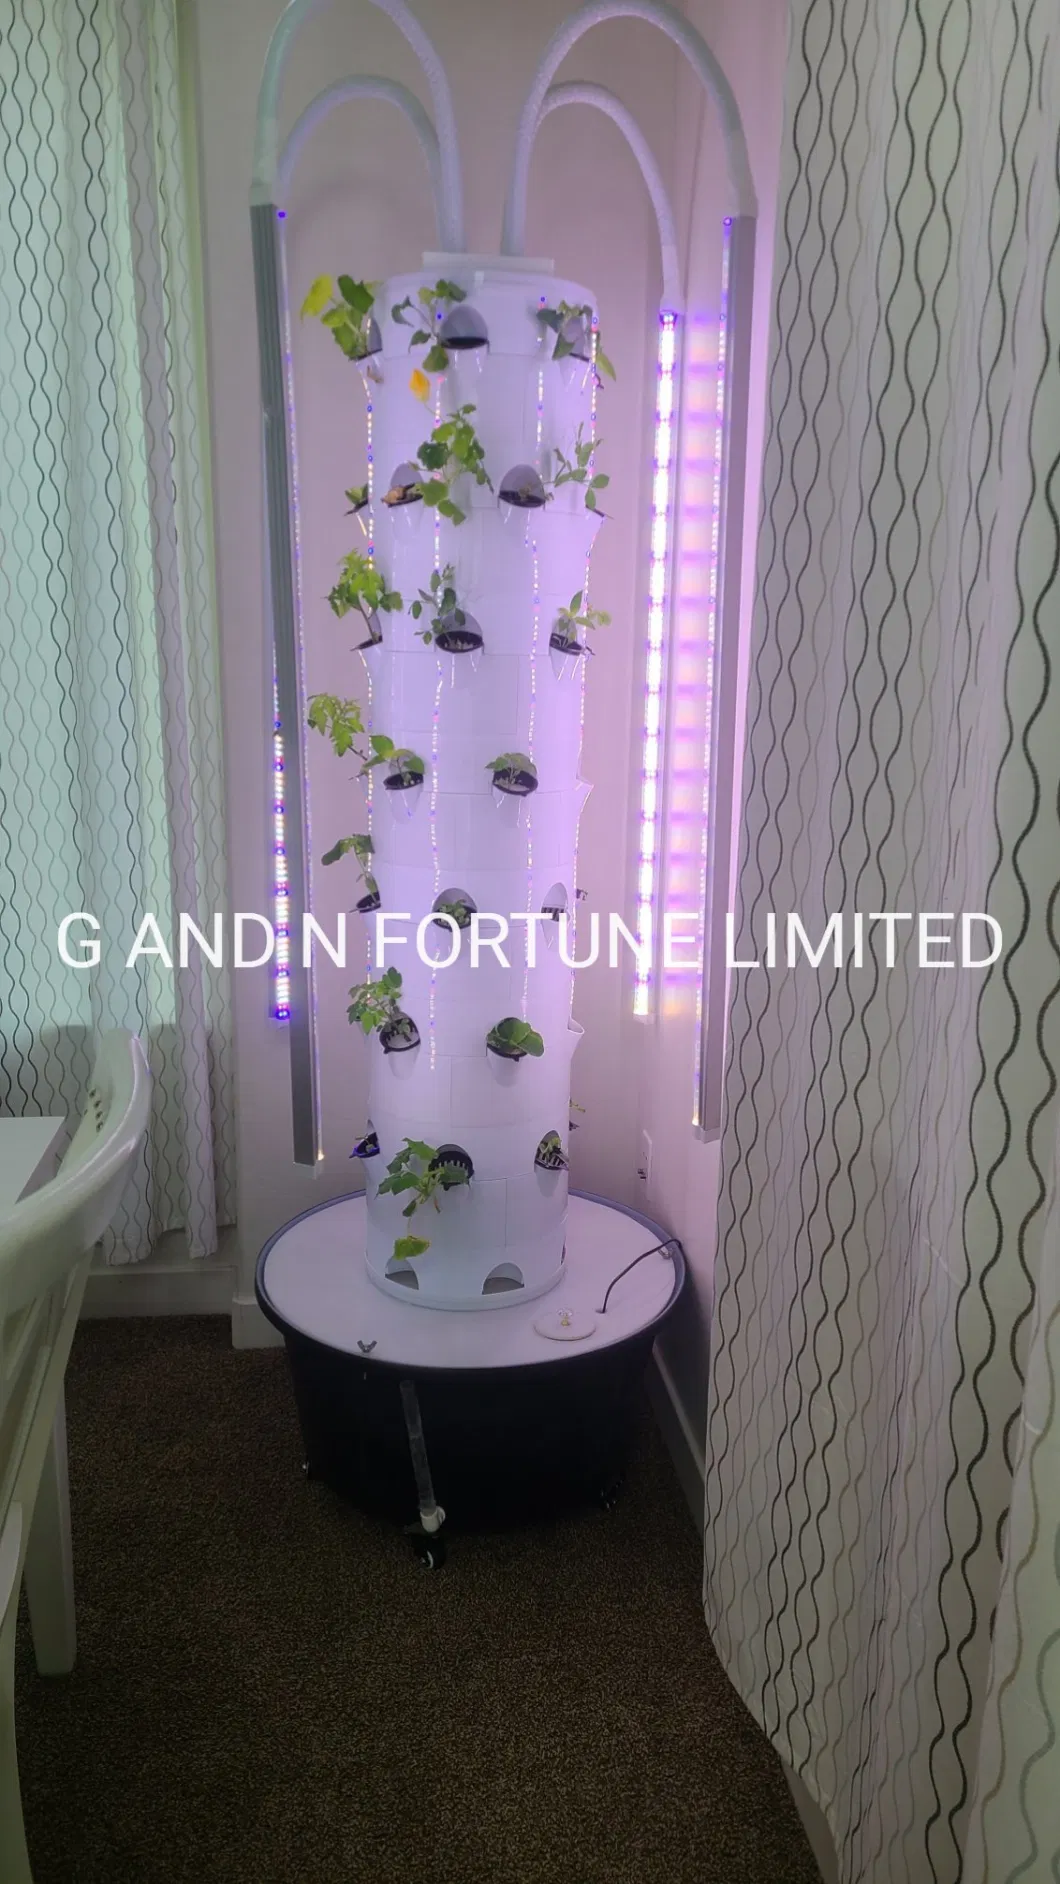 Tower Garden Vertical Hydroponic Growing Vertical Tower for Strawberries